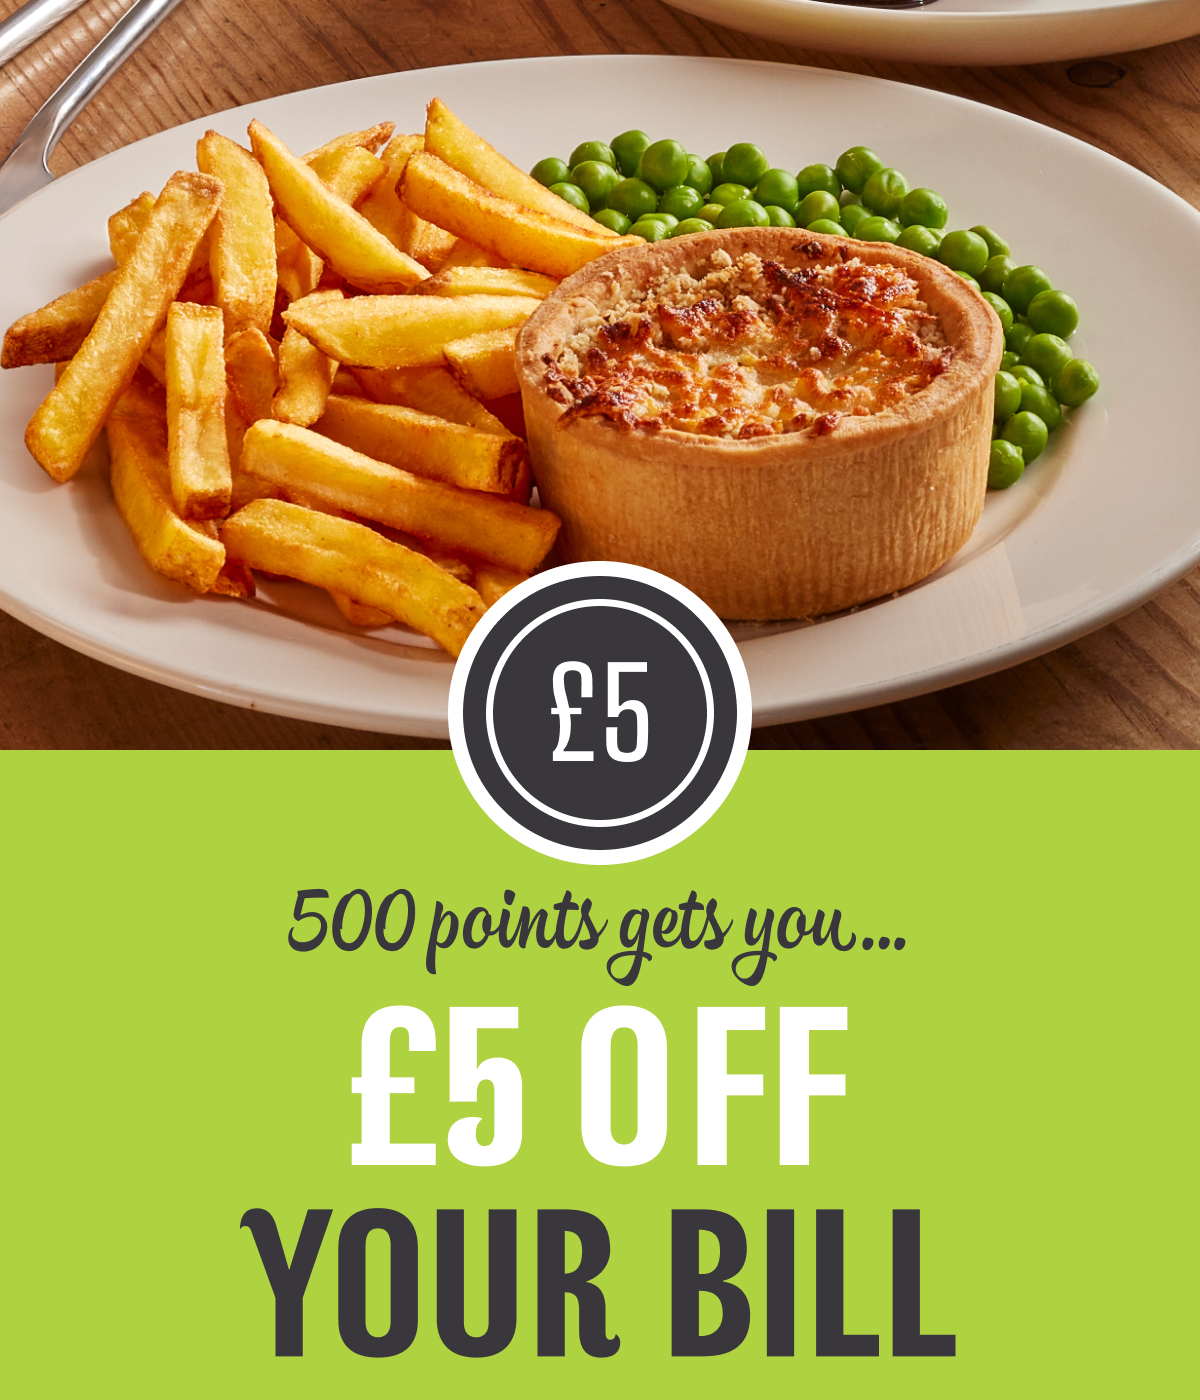 500 points gets you... 2 free main meals